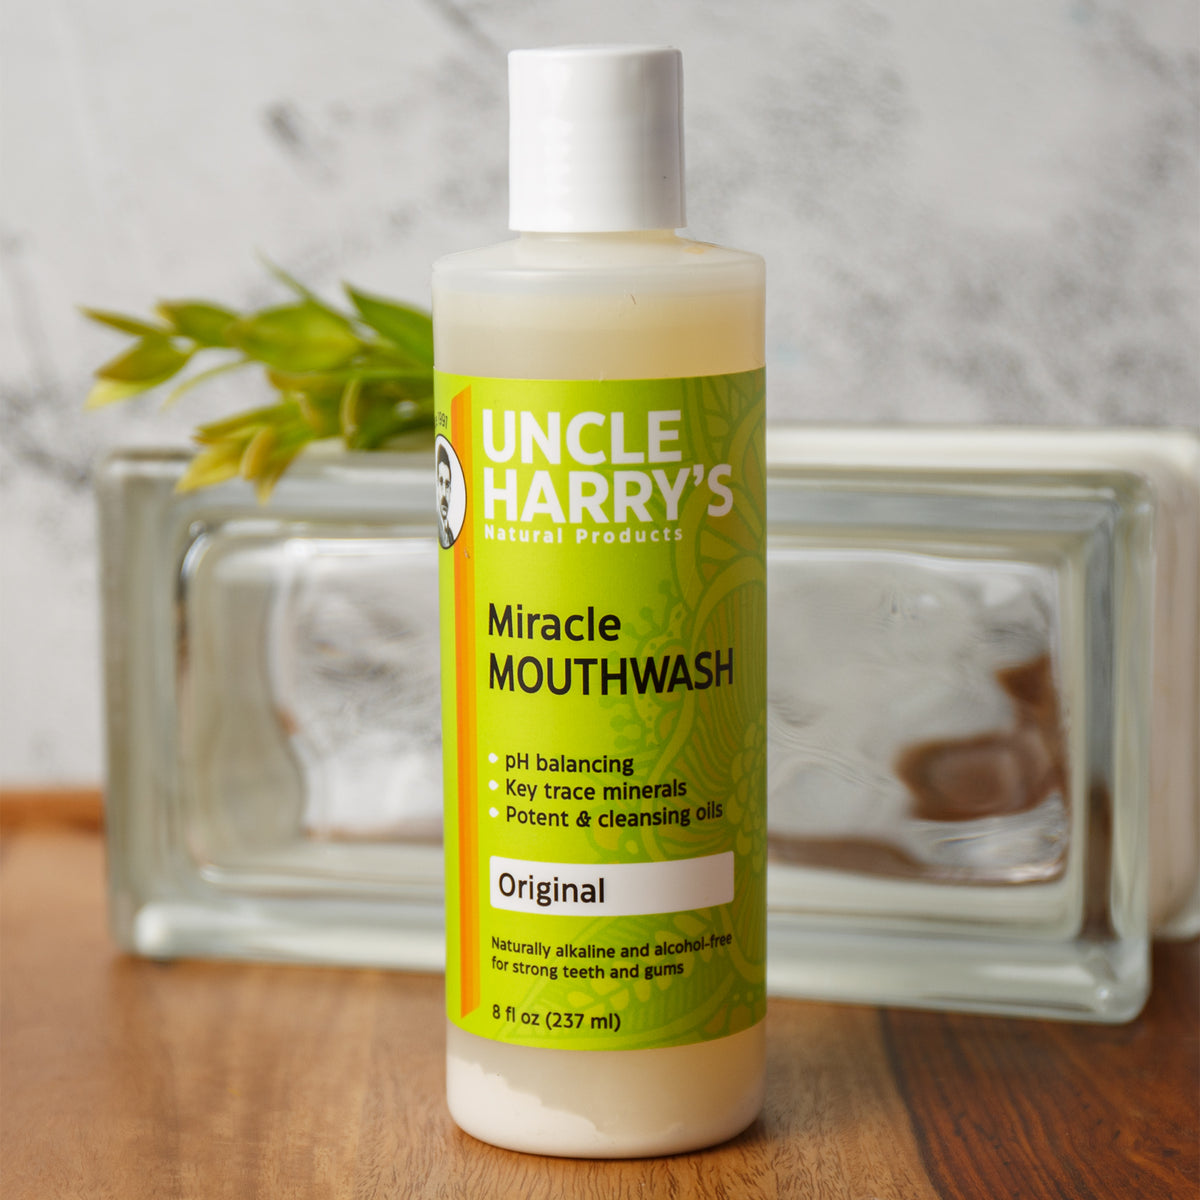 Uncle Harry's Natural Products Miracle Mouthwash (8 fl oz) #10071081